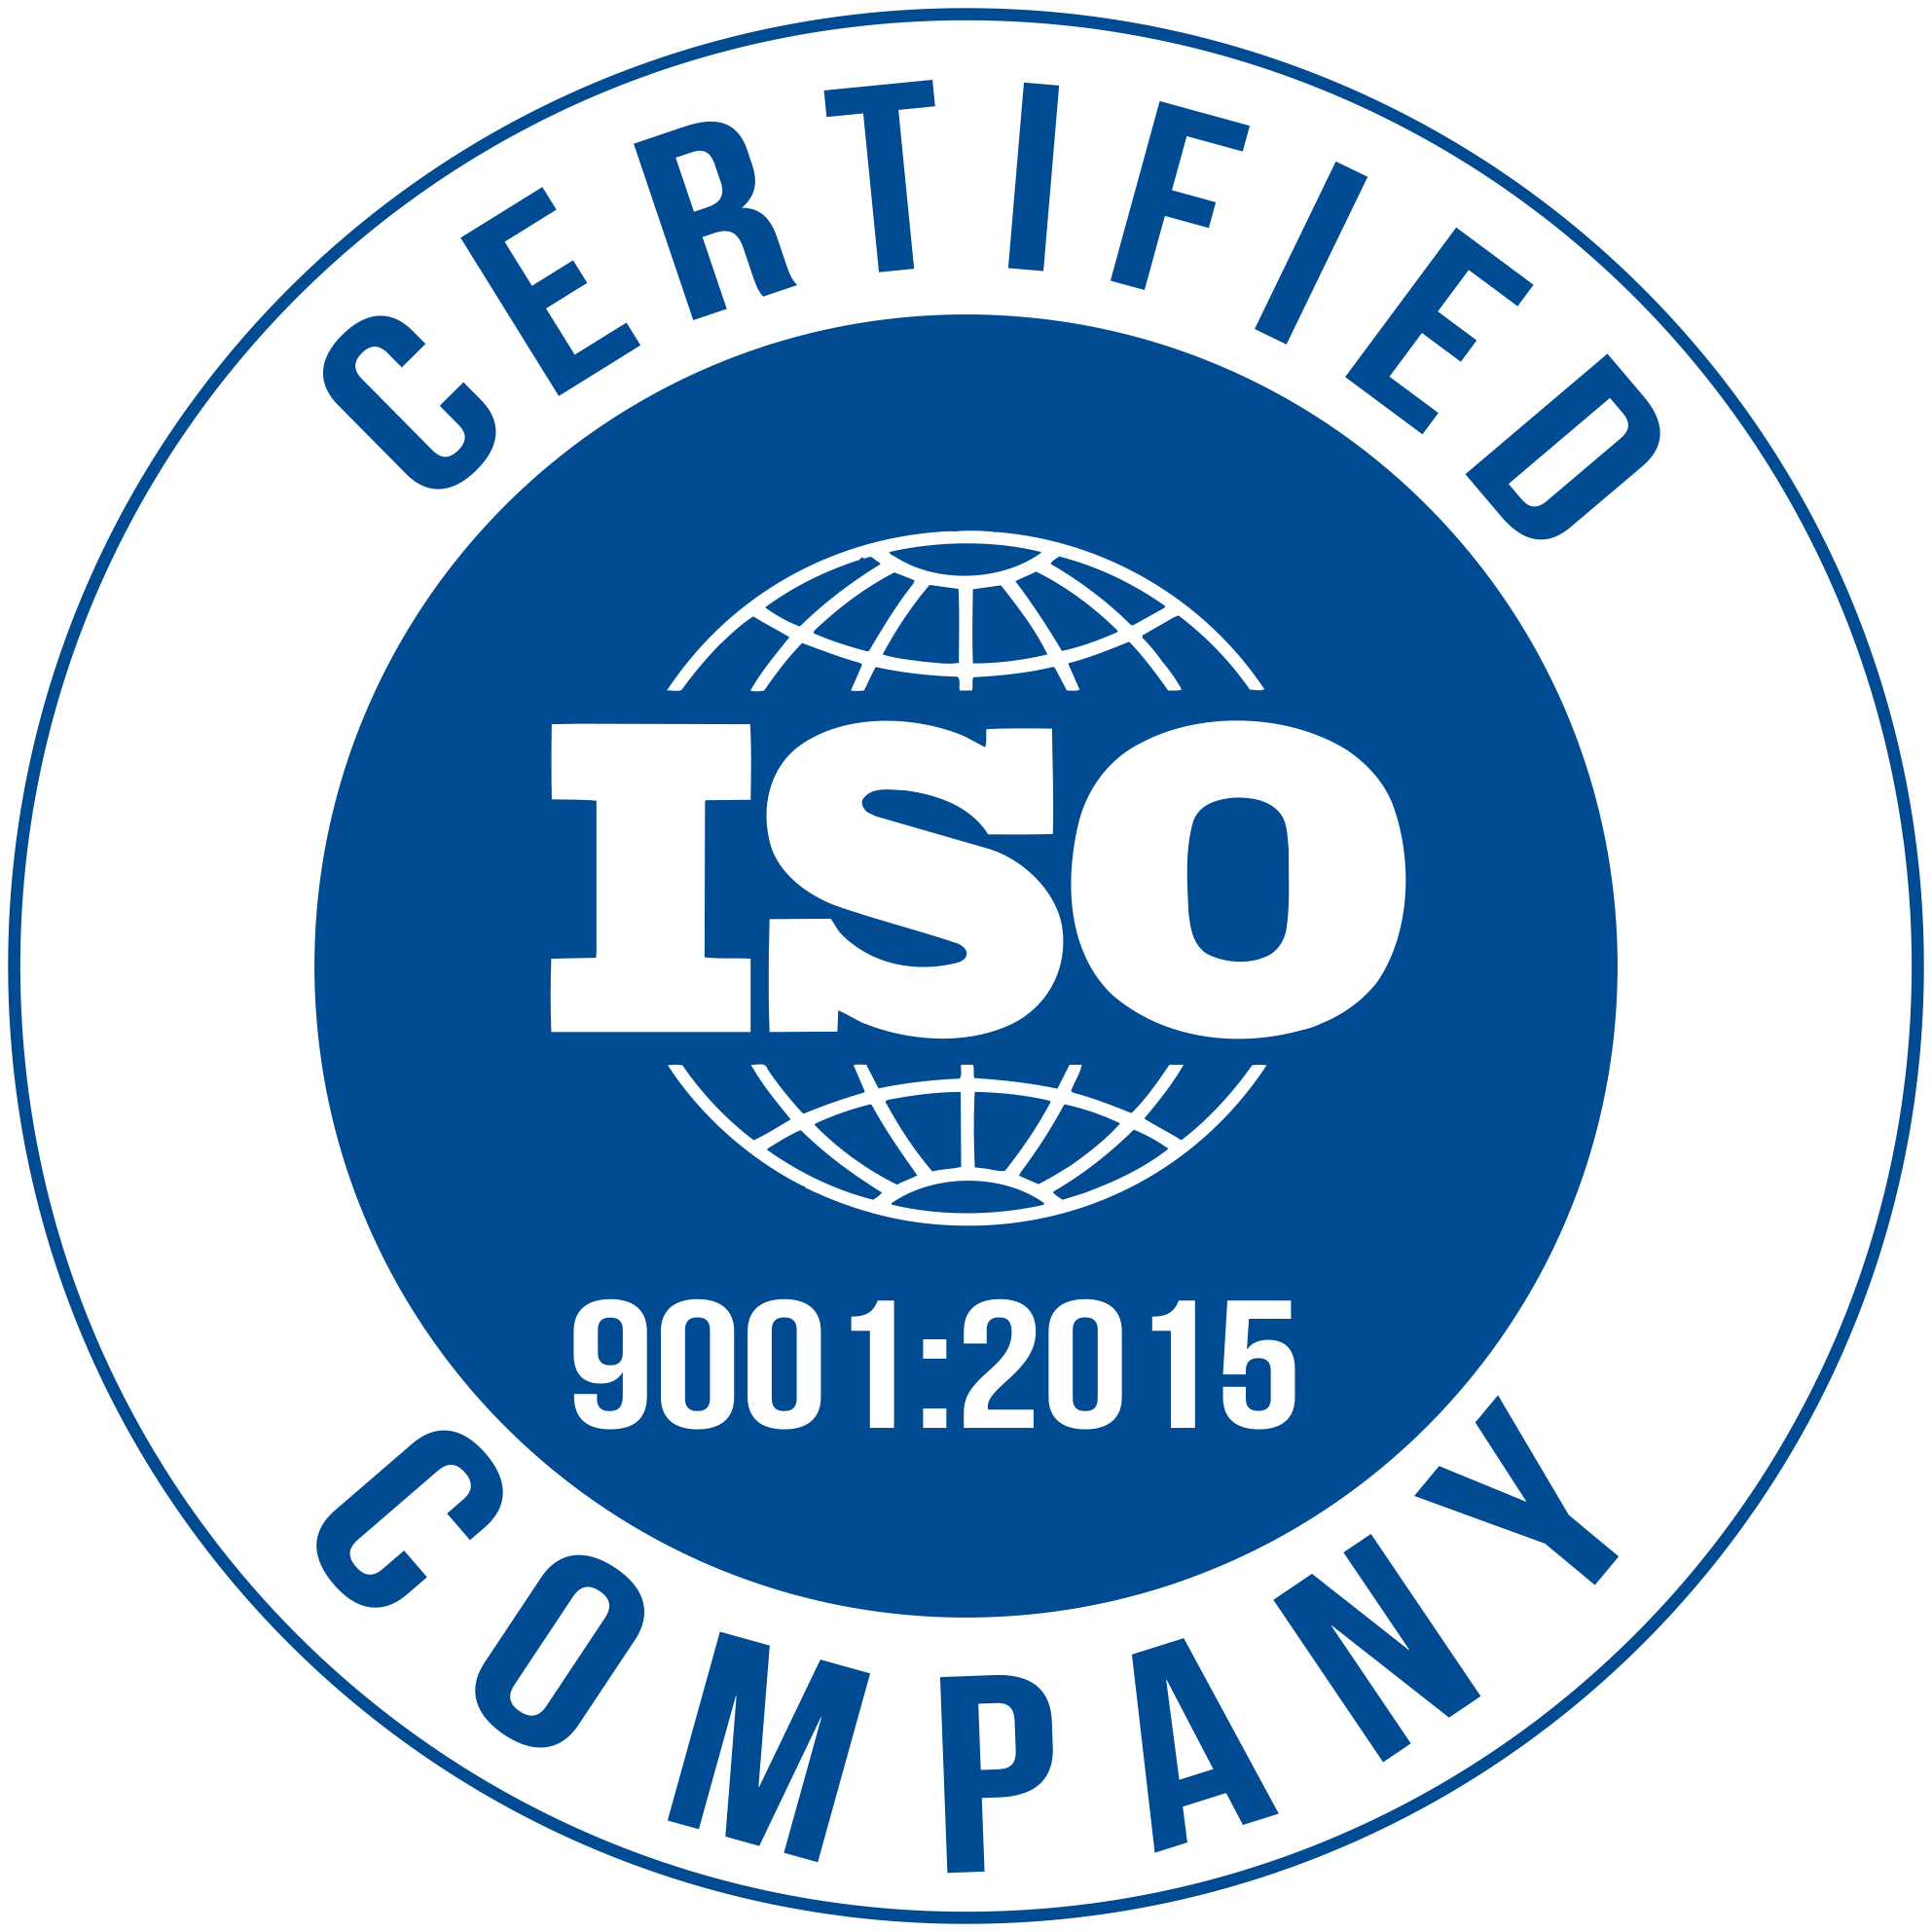 iso9001